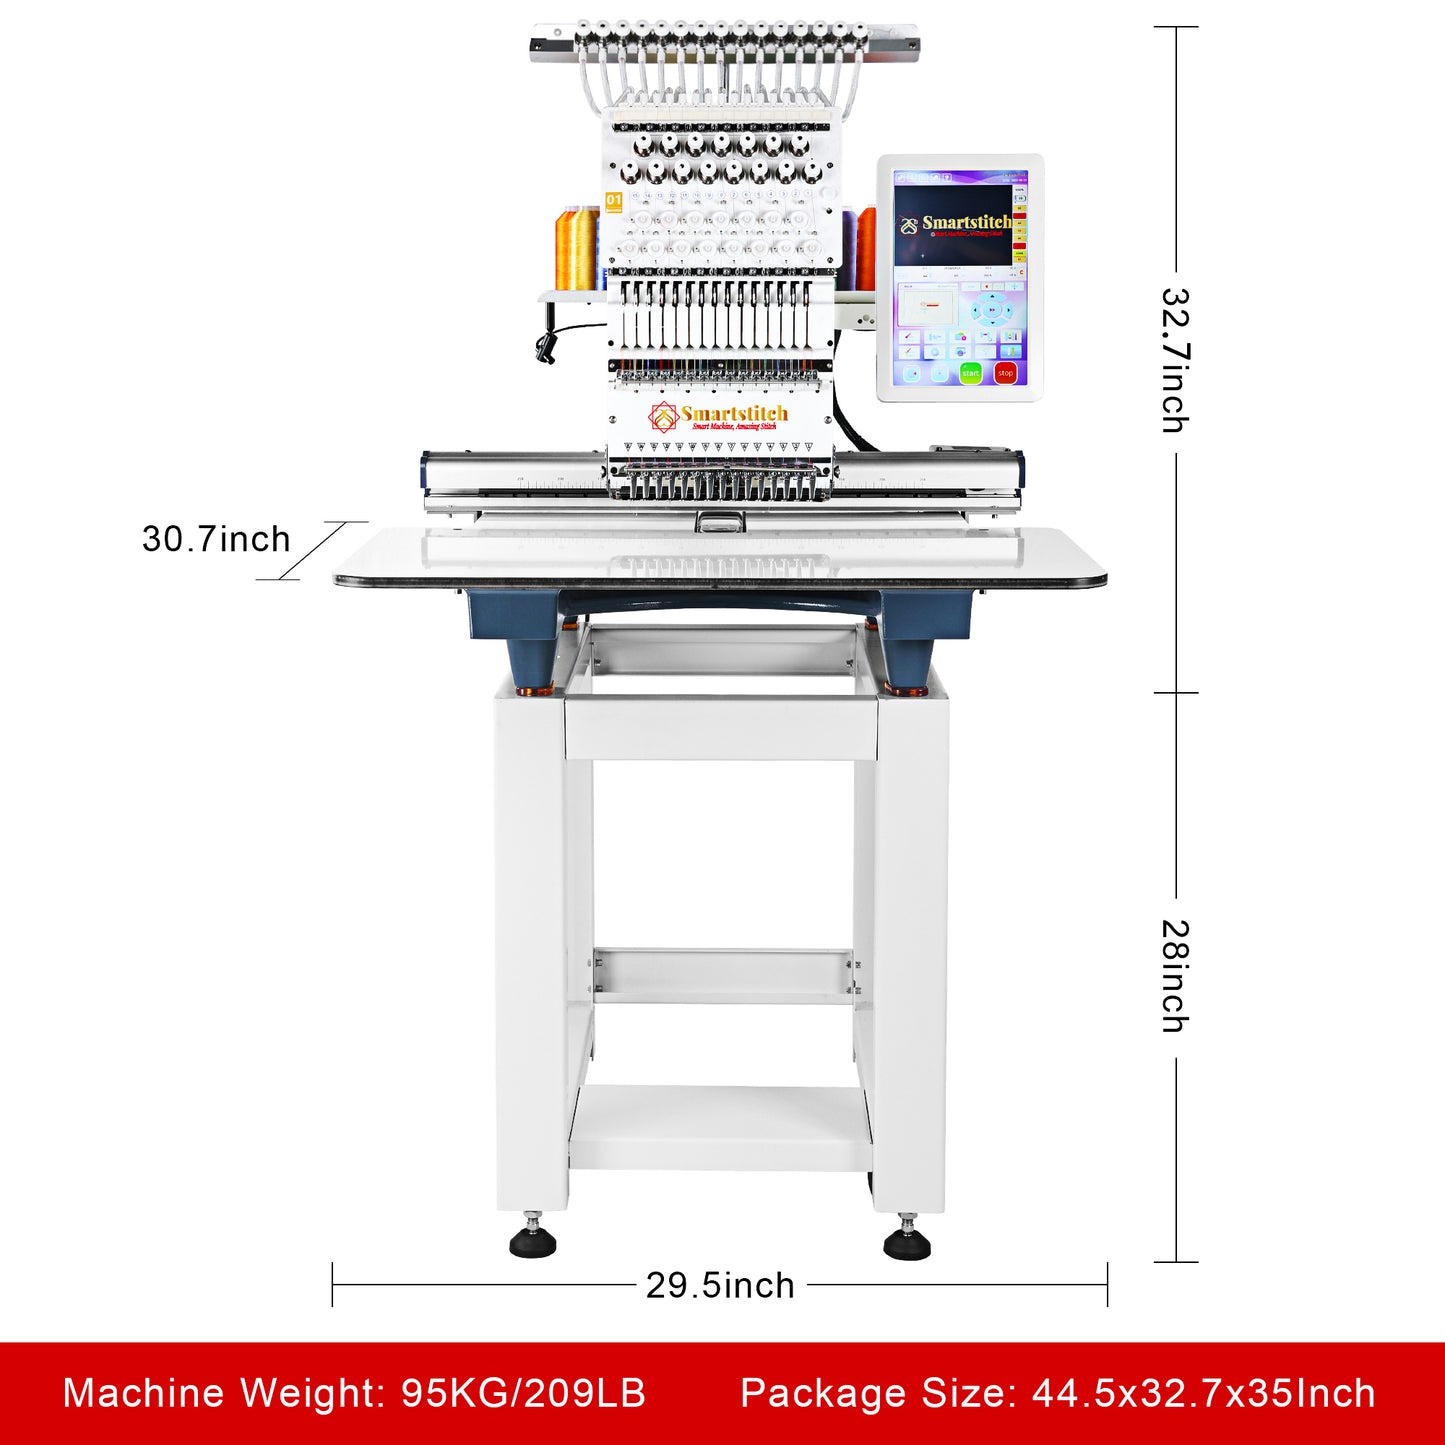 Smartstitch Embroidery Machine S1501, 15 Needles, Max Speed 1200RPM,  Commercial Embroidery Machine for Hats and Clothing with 13.8"x19.7" Embroidery Area (Blue)